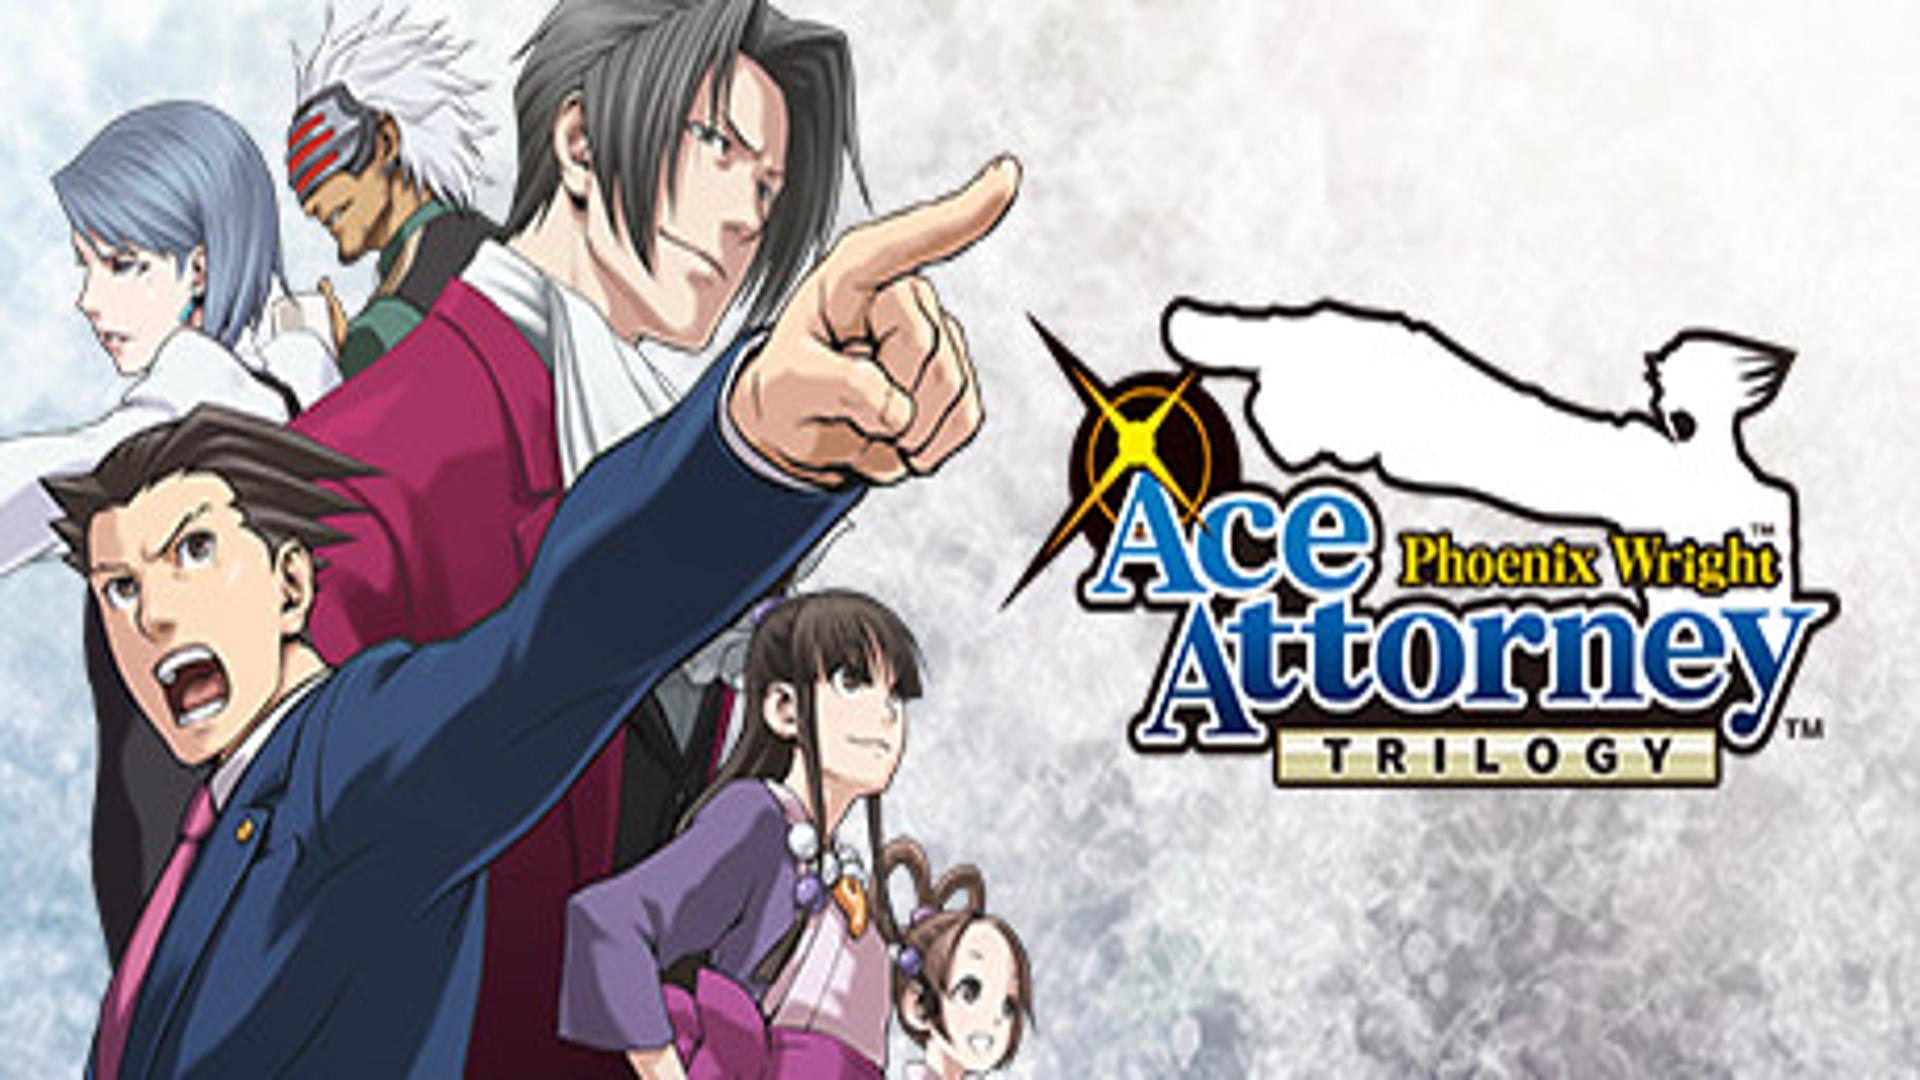 Phoenix Wright: Ace Attorney Trilogy – Free Download (Build 11356493)